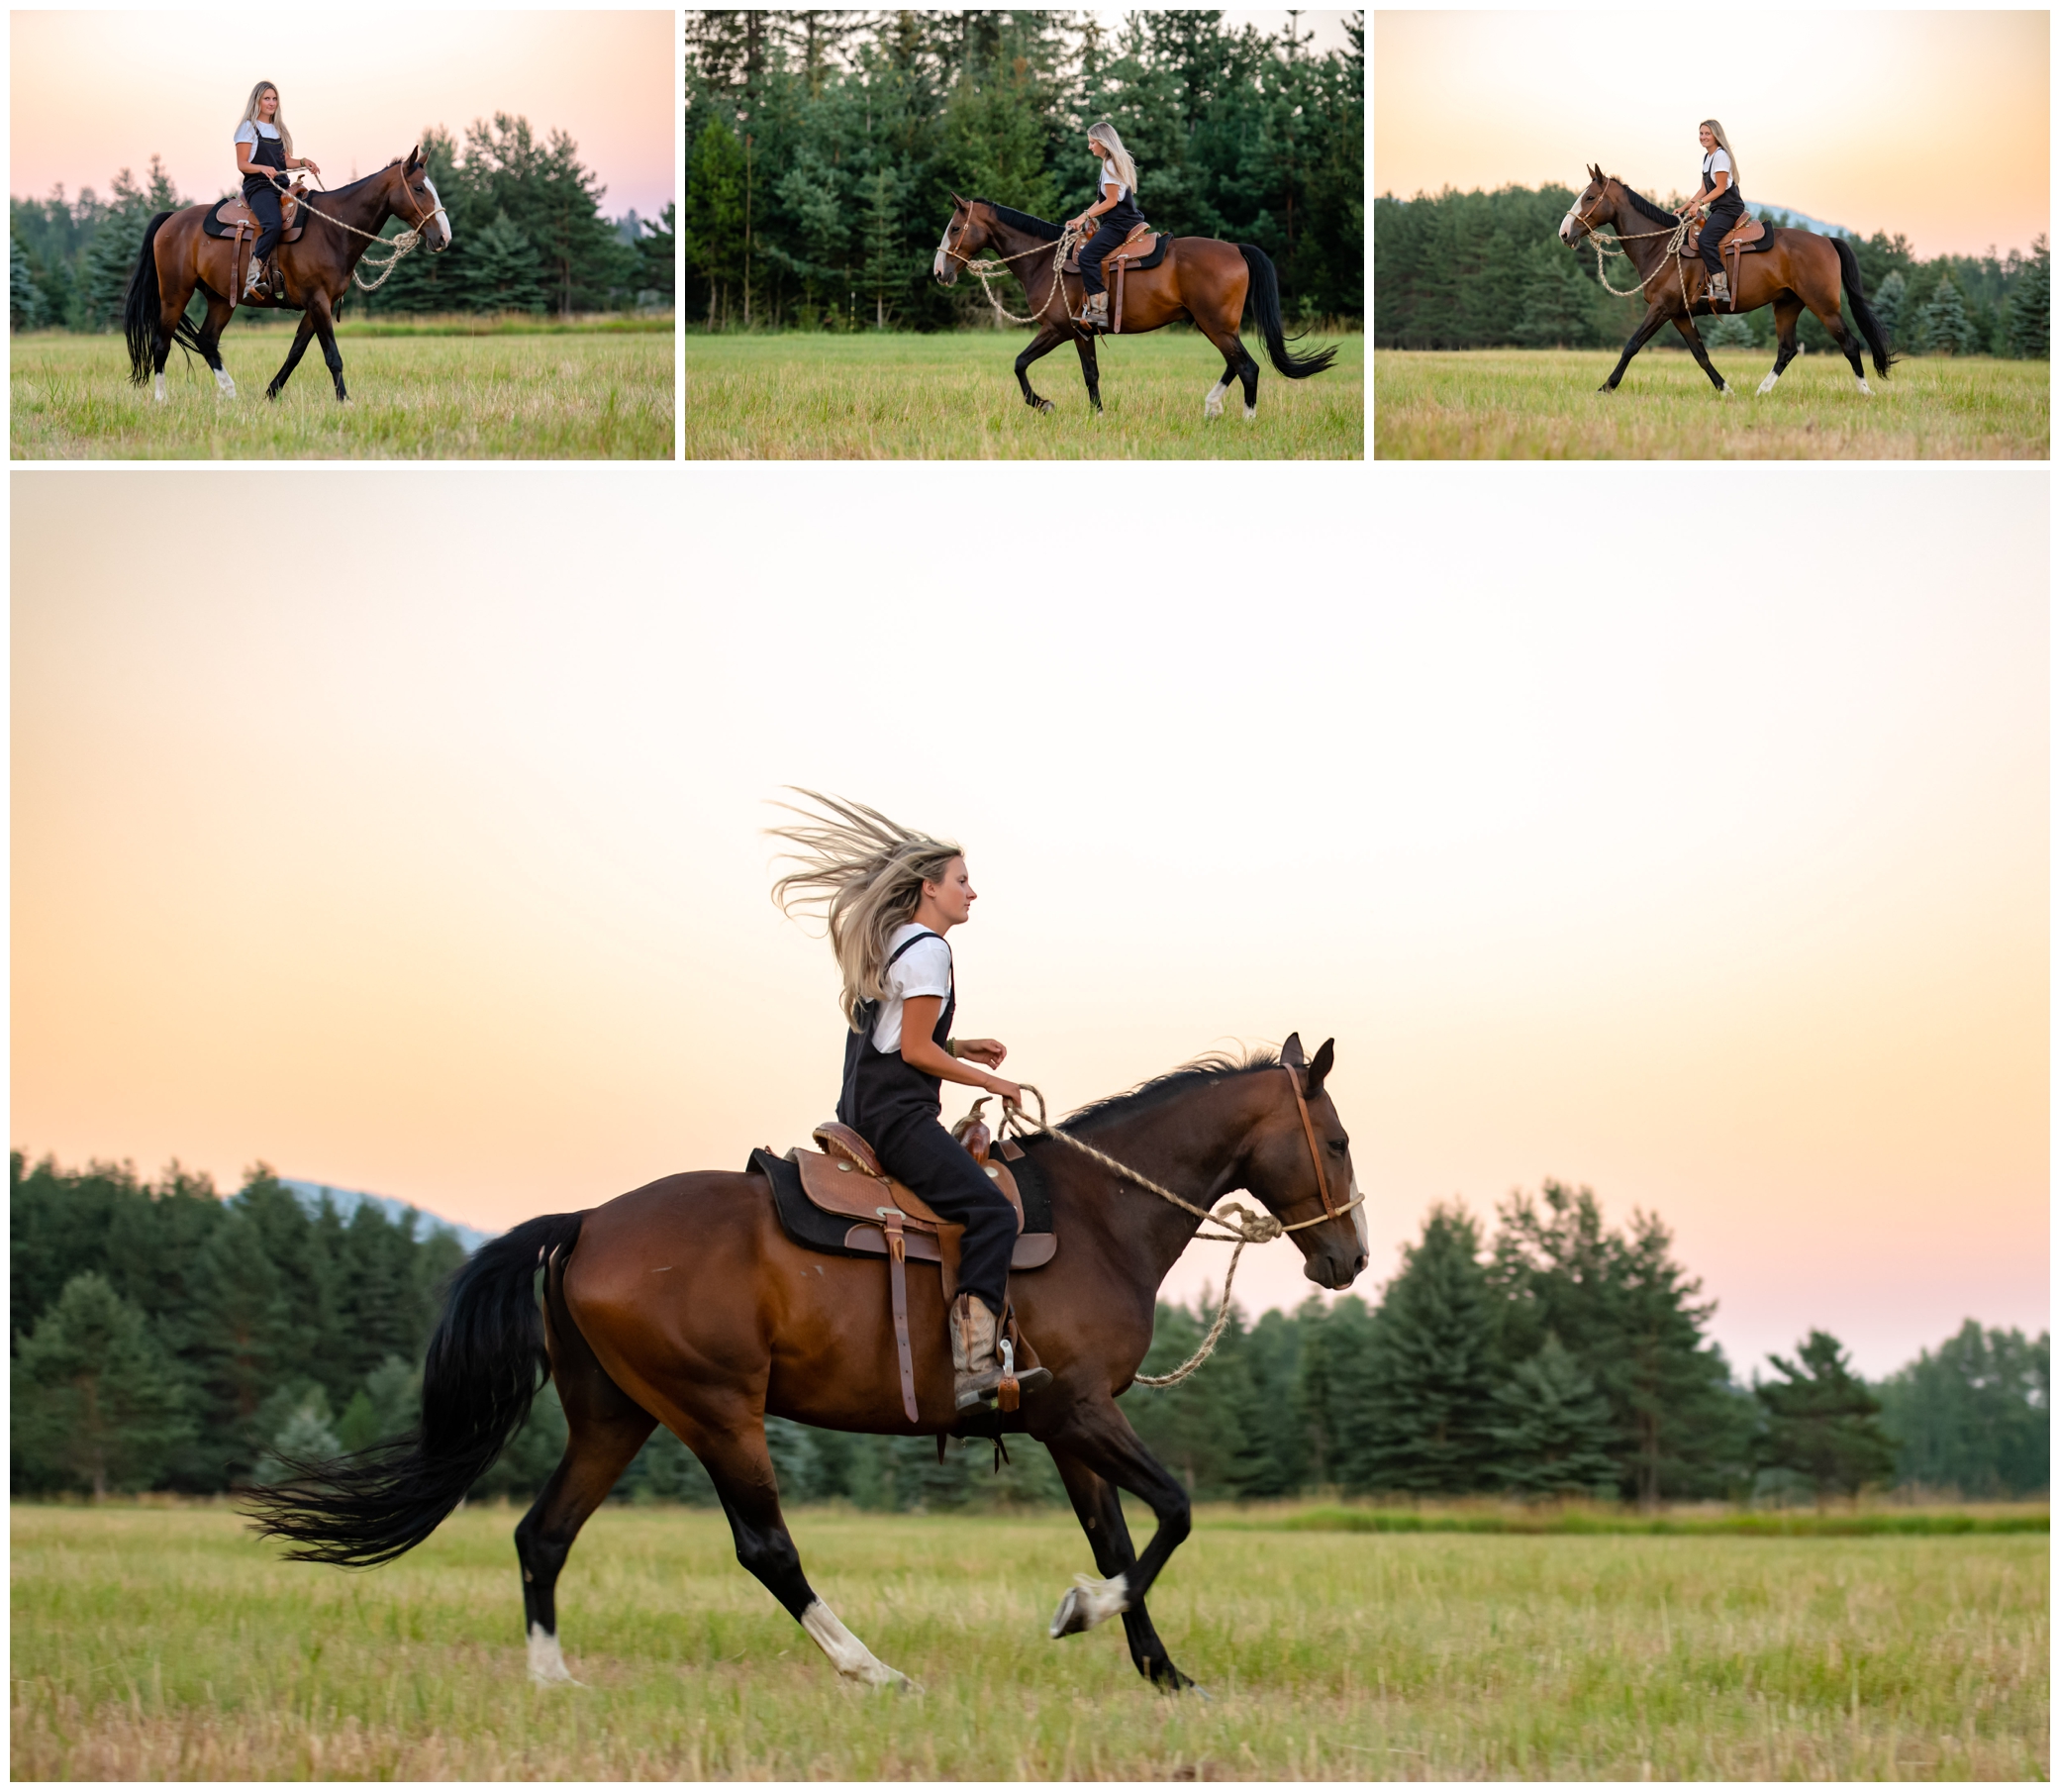 Cantering at Sunset in Sandpoint